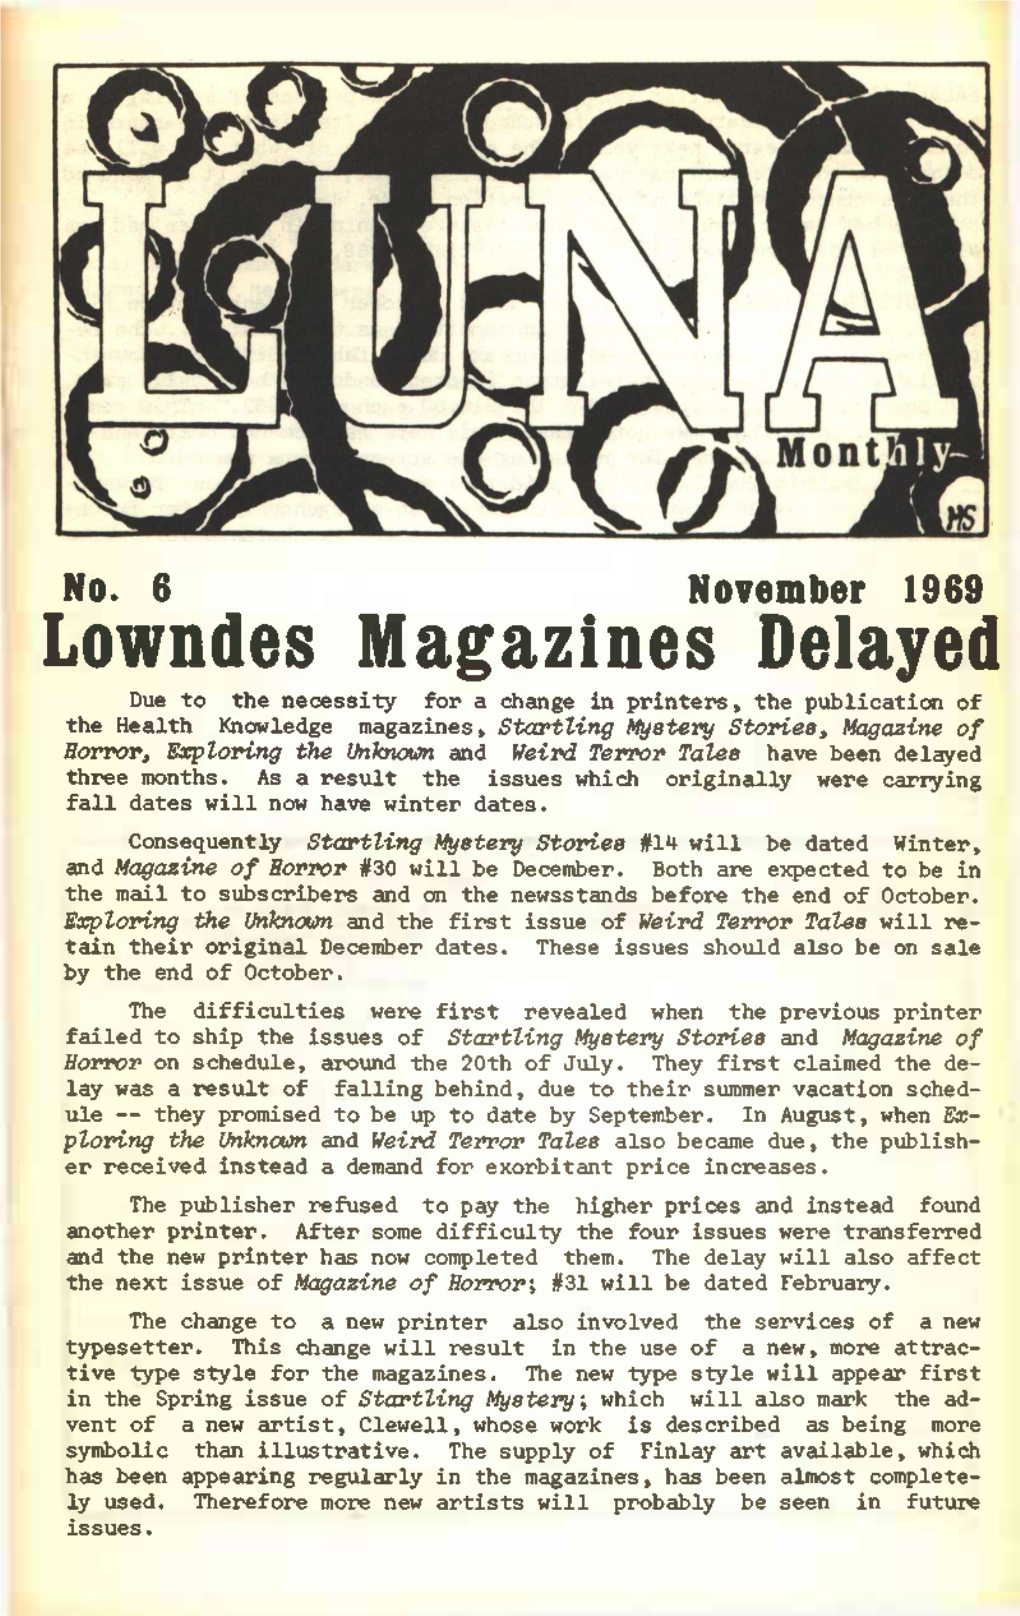 Lowndes Magazines Delayed